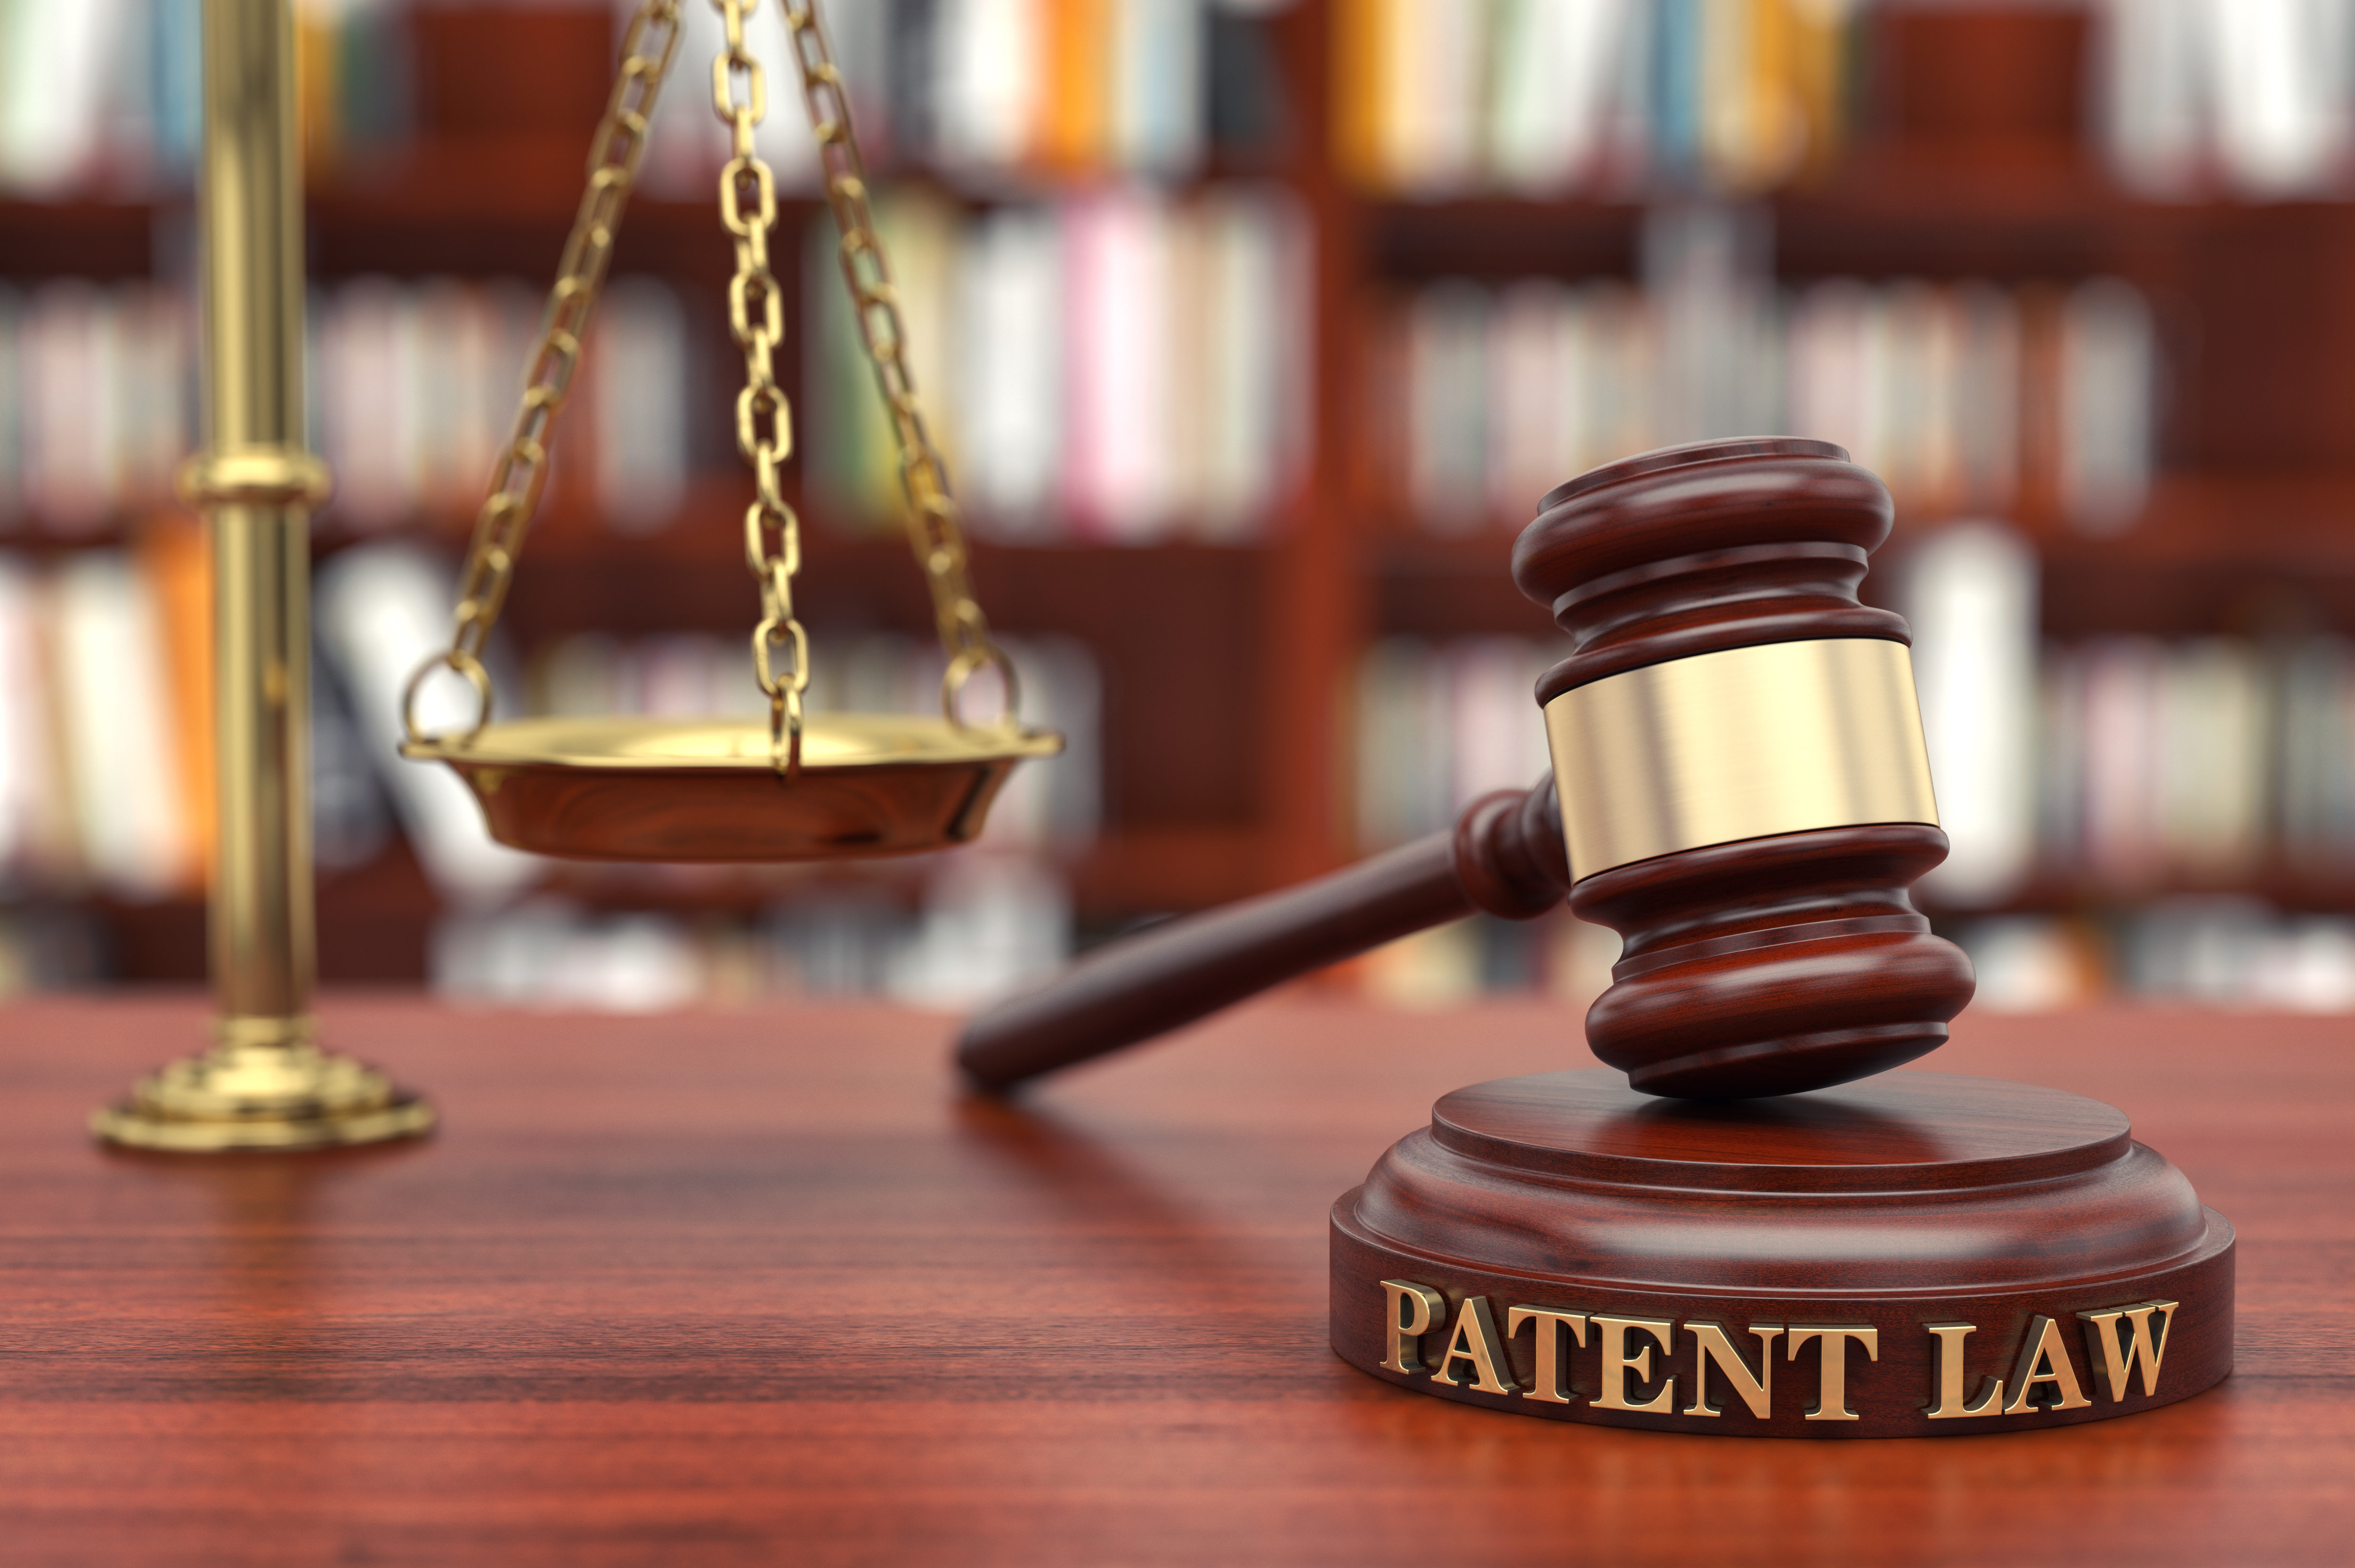 IPExcel offers the top patent lawyers and international lawyers who will help you navigate through patent-related matters.